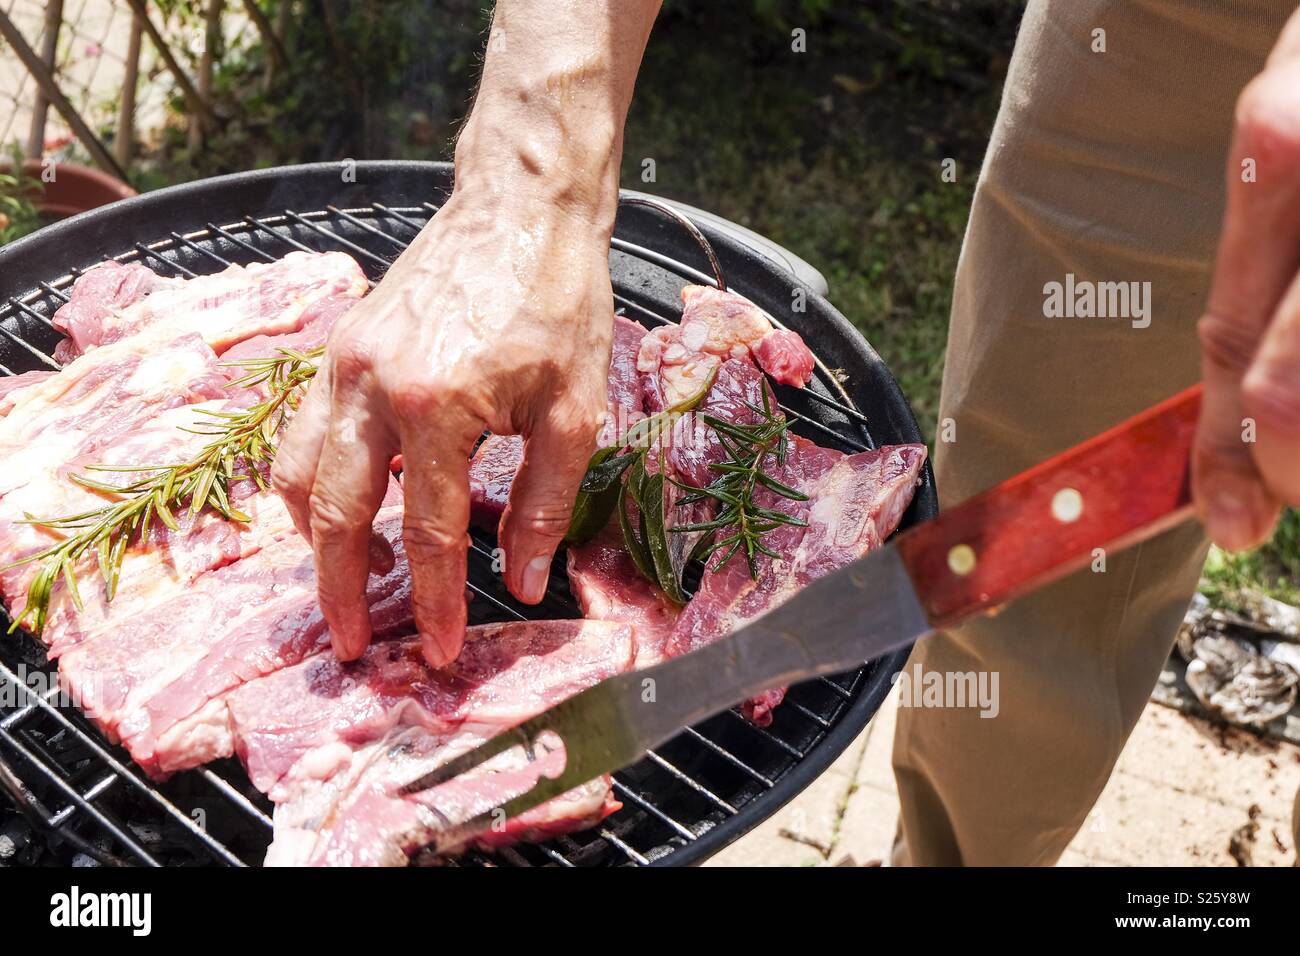 Grilling cow meat outdoors in a rounded small barbecue Stock Photo